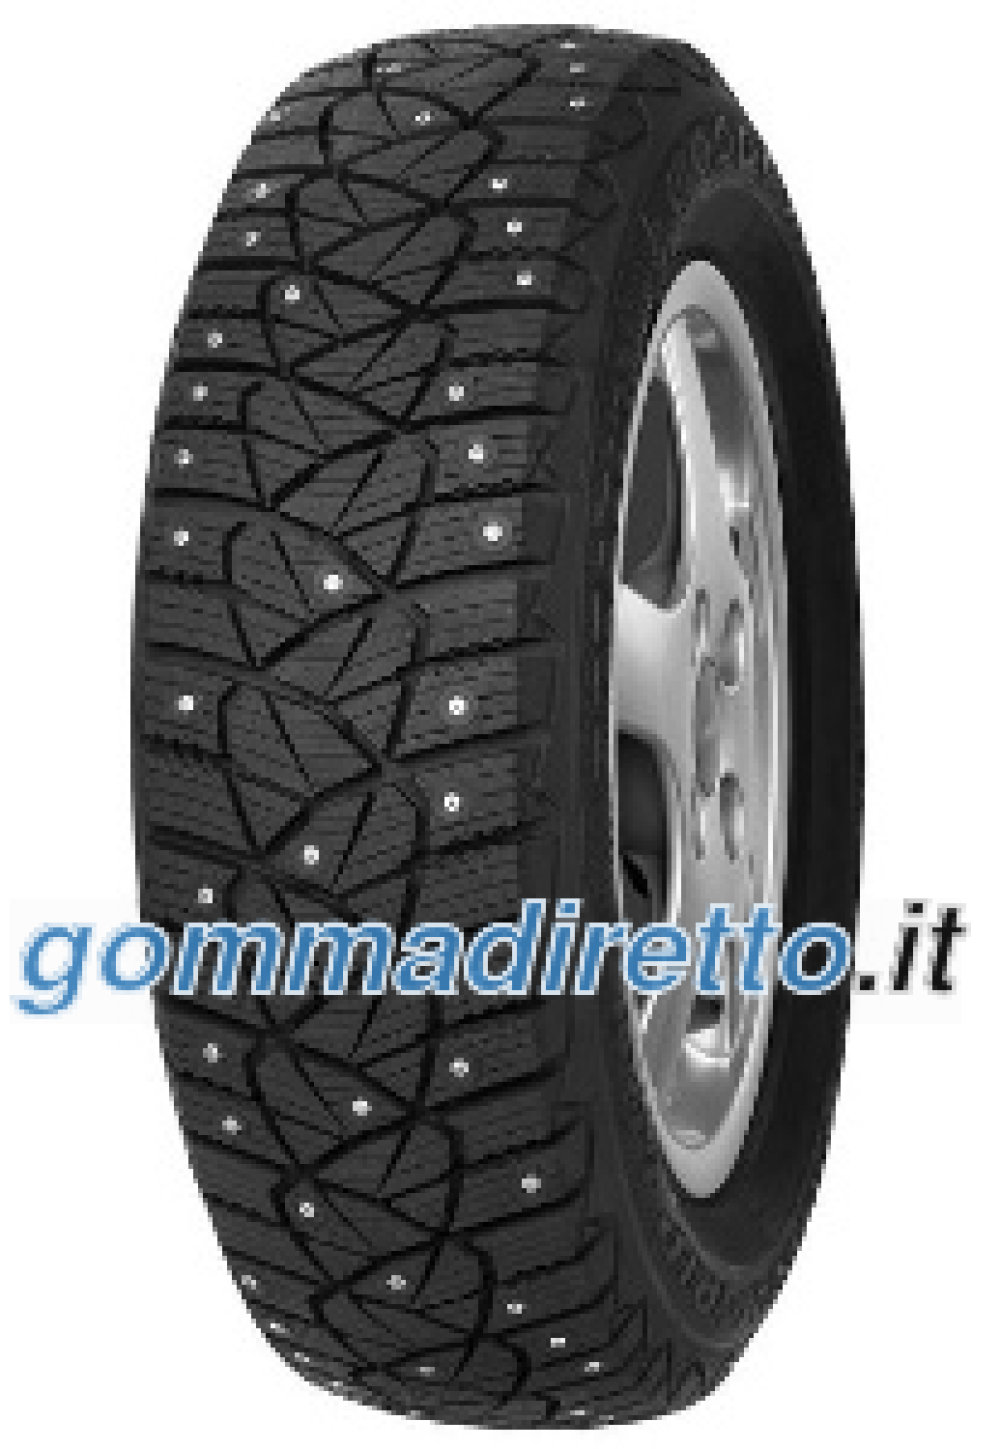 Image of Goodyear Ultra Grip 600 ( 185/60 R15 88T XL, pneumatico chiodato )